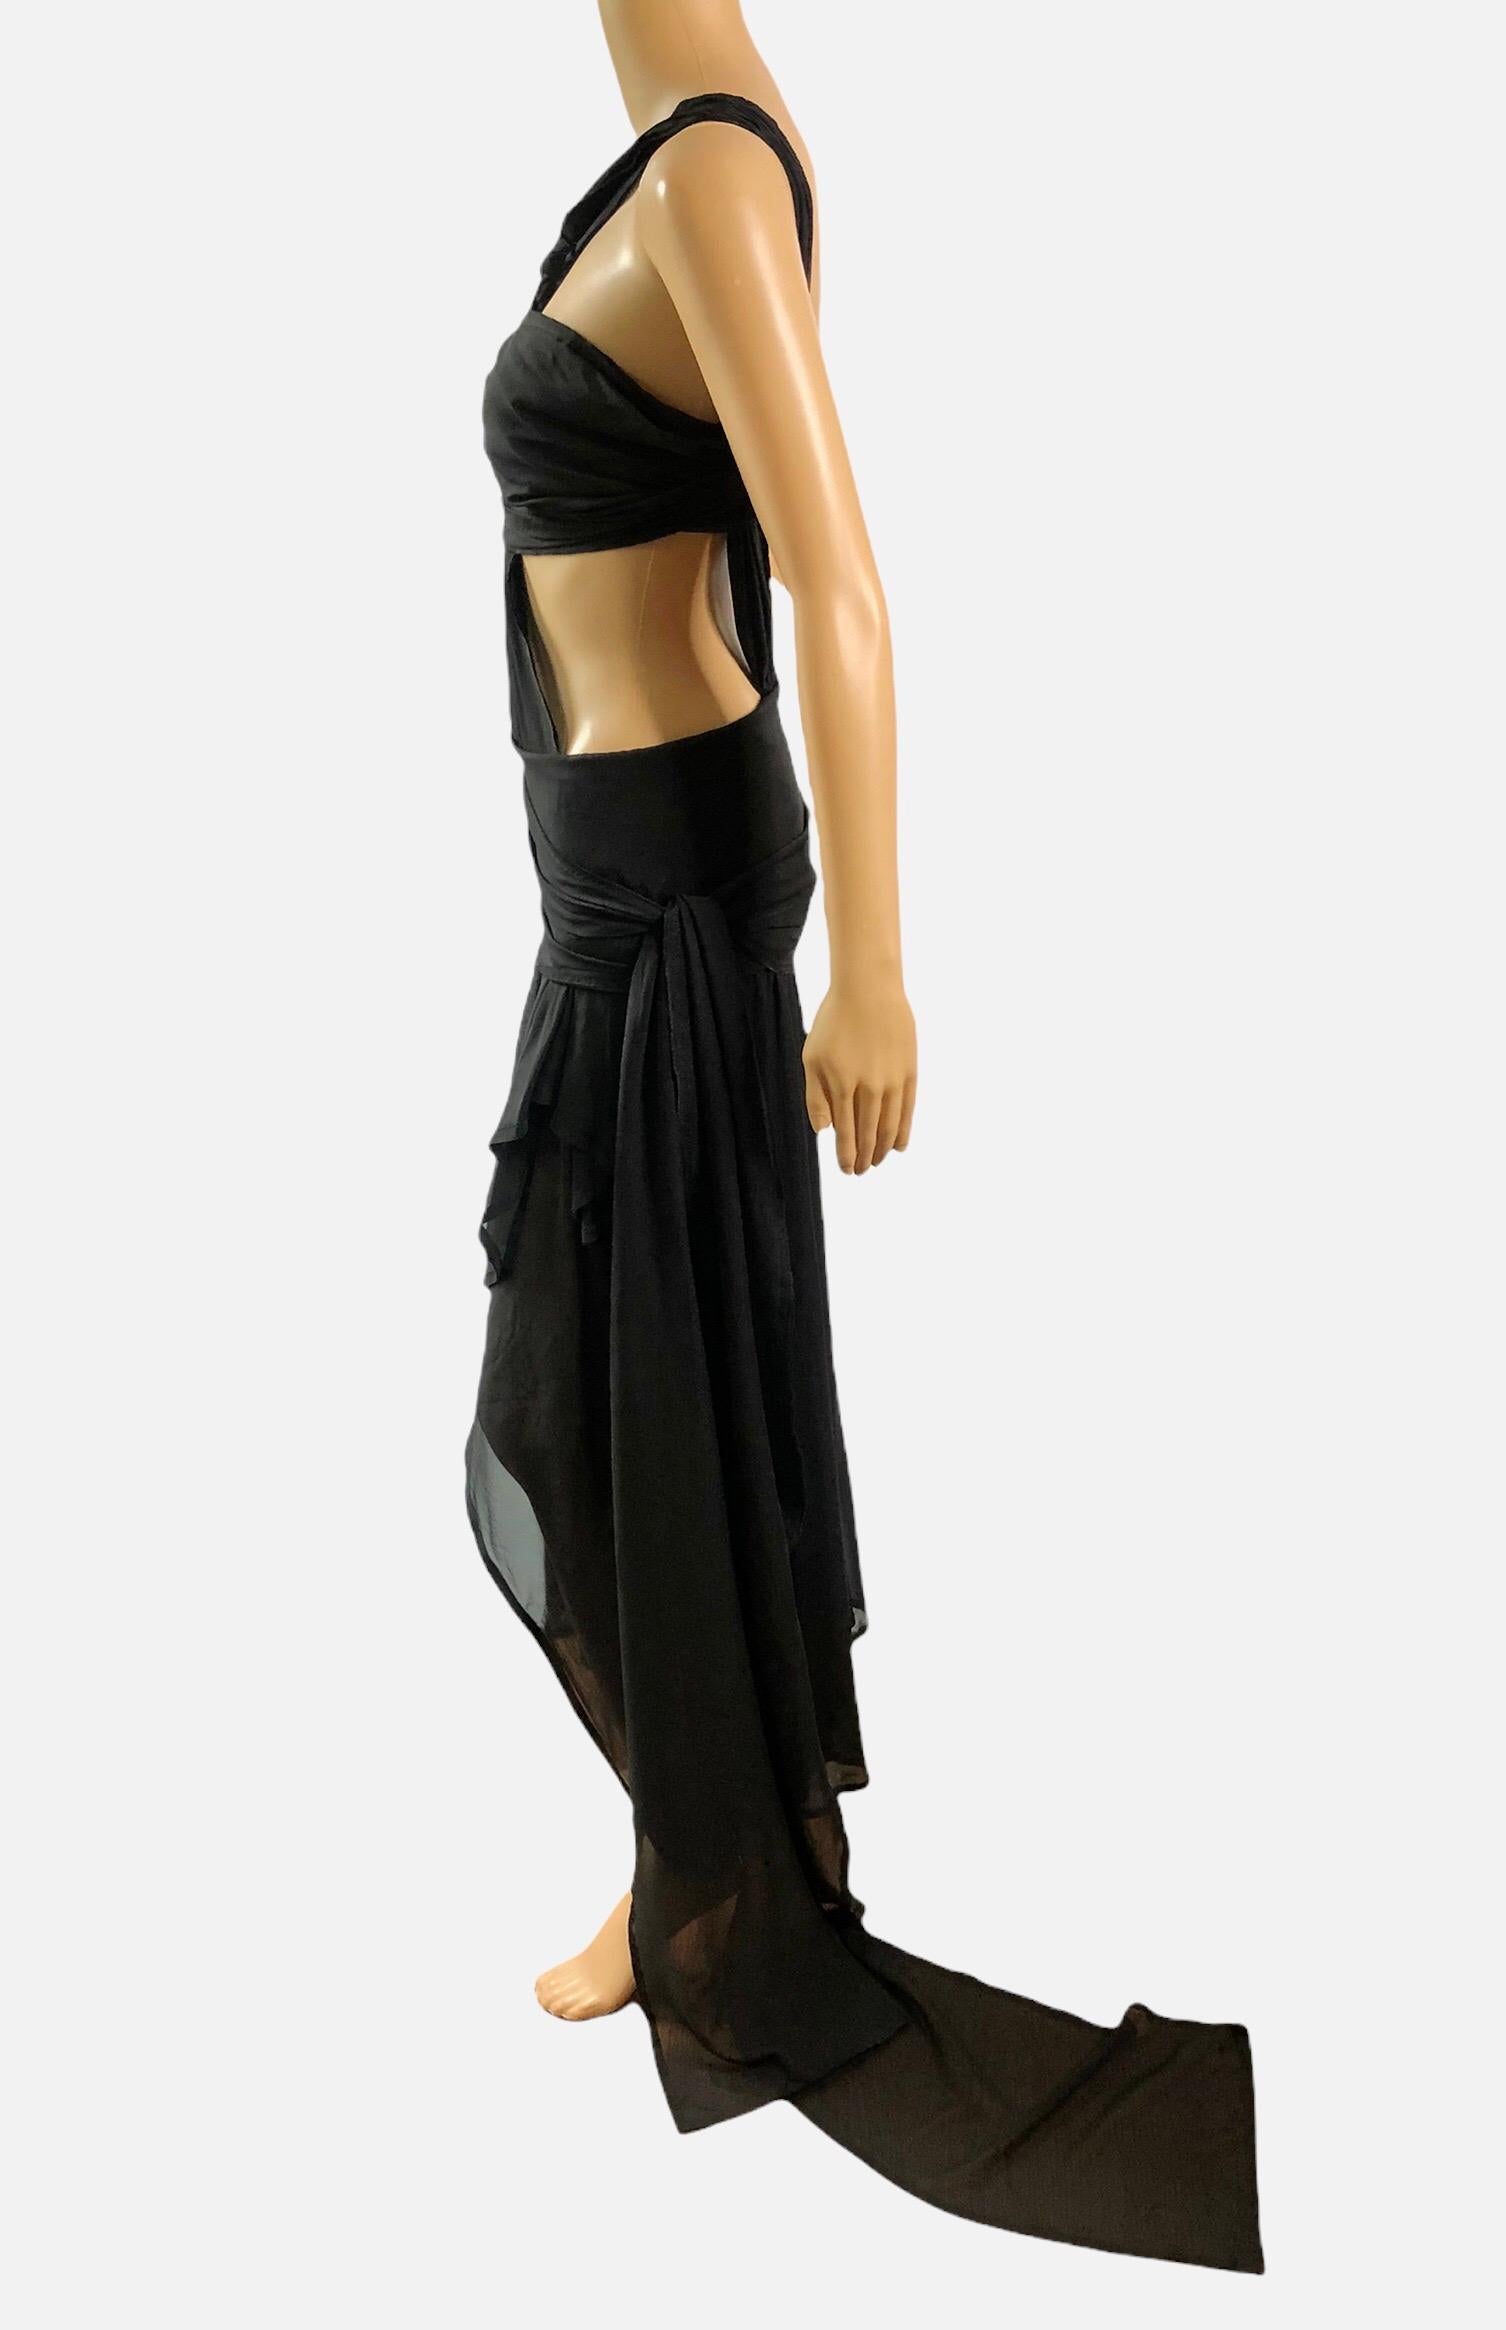 Women's Tom Ford for Yves Saint Laurent S/S 2002 Runway Sheer Cutout Black Dress Gown For Sale